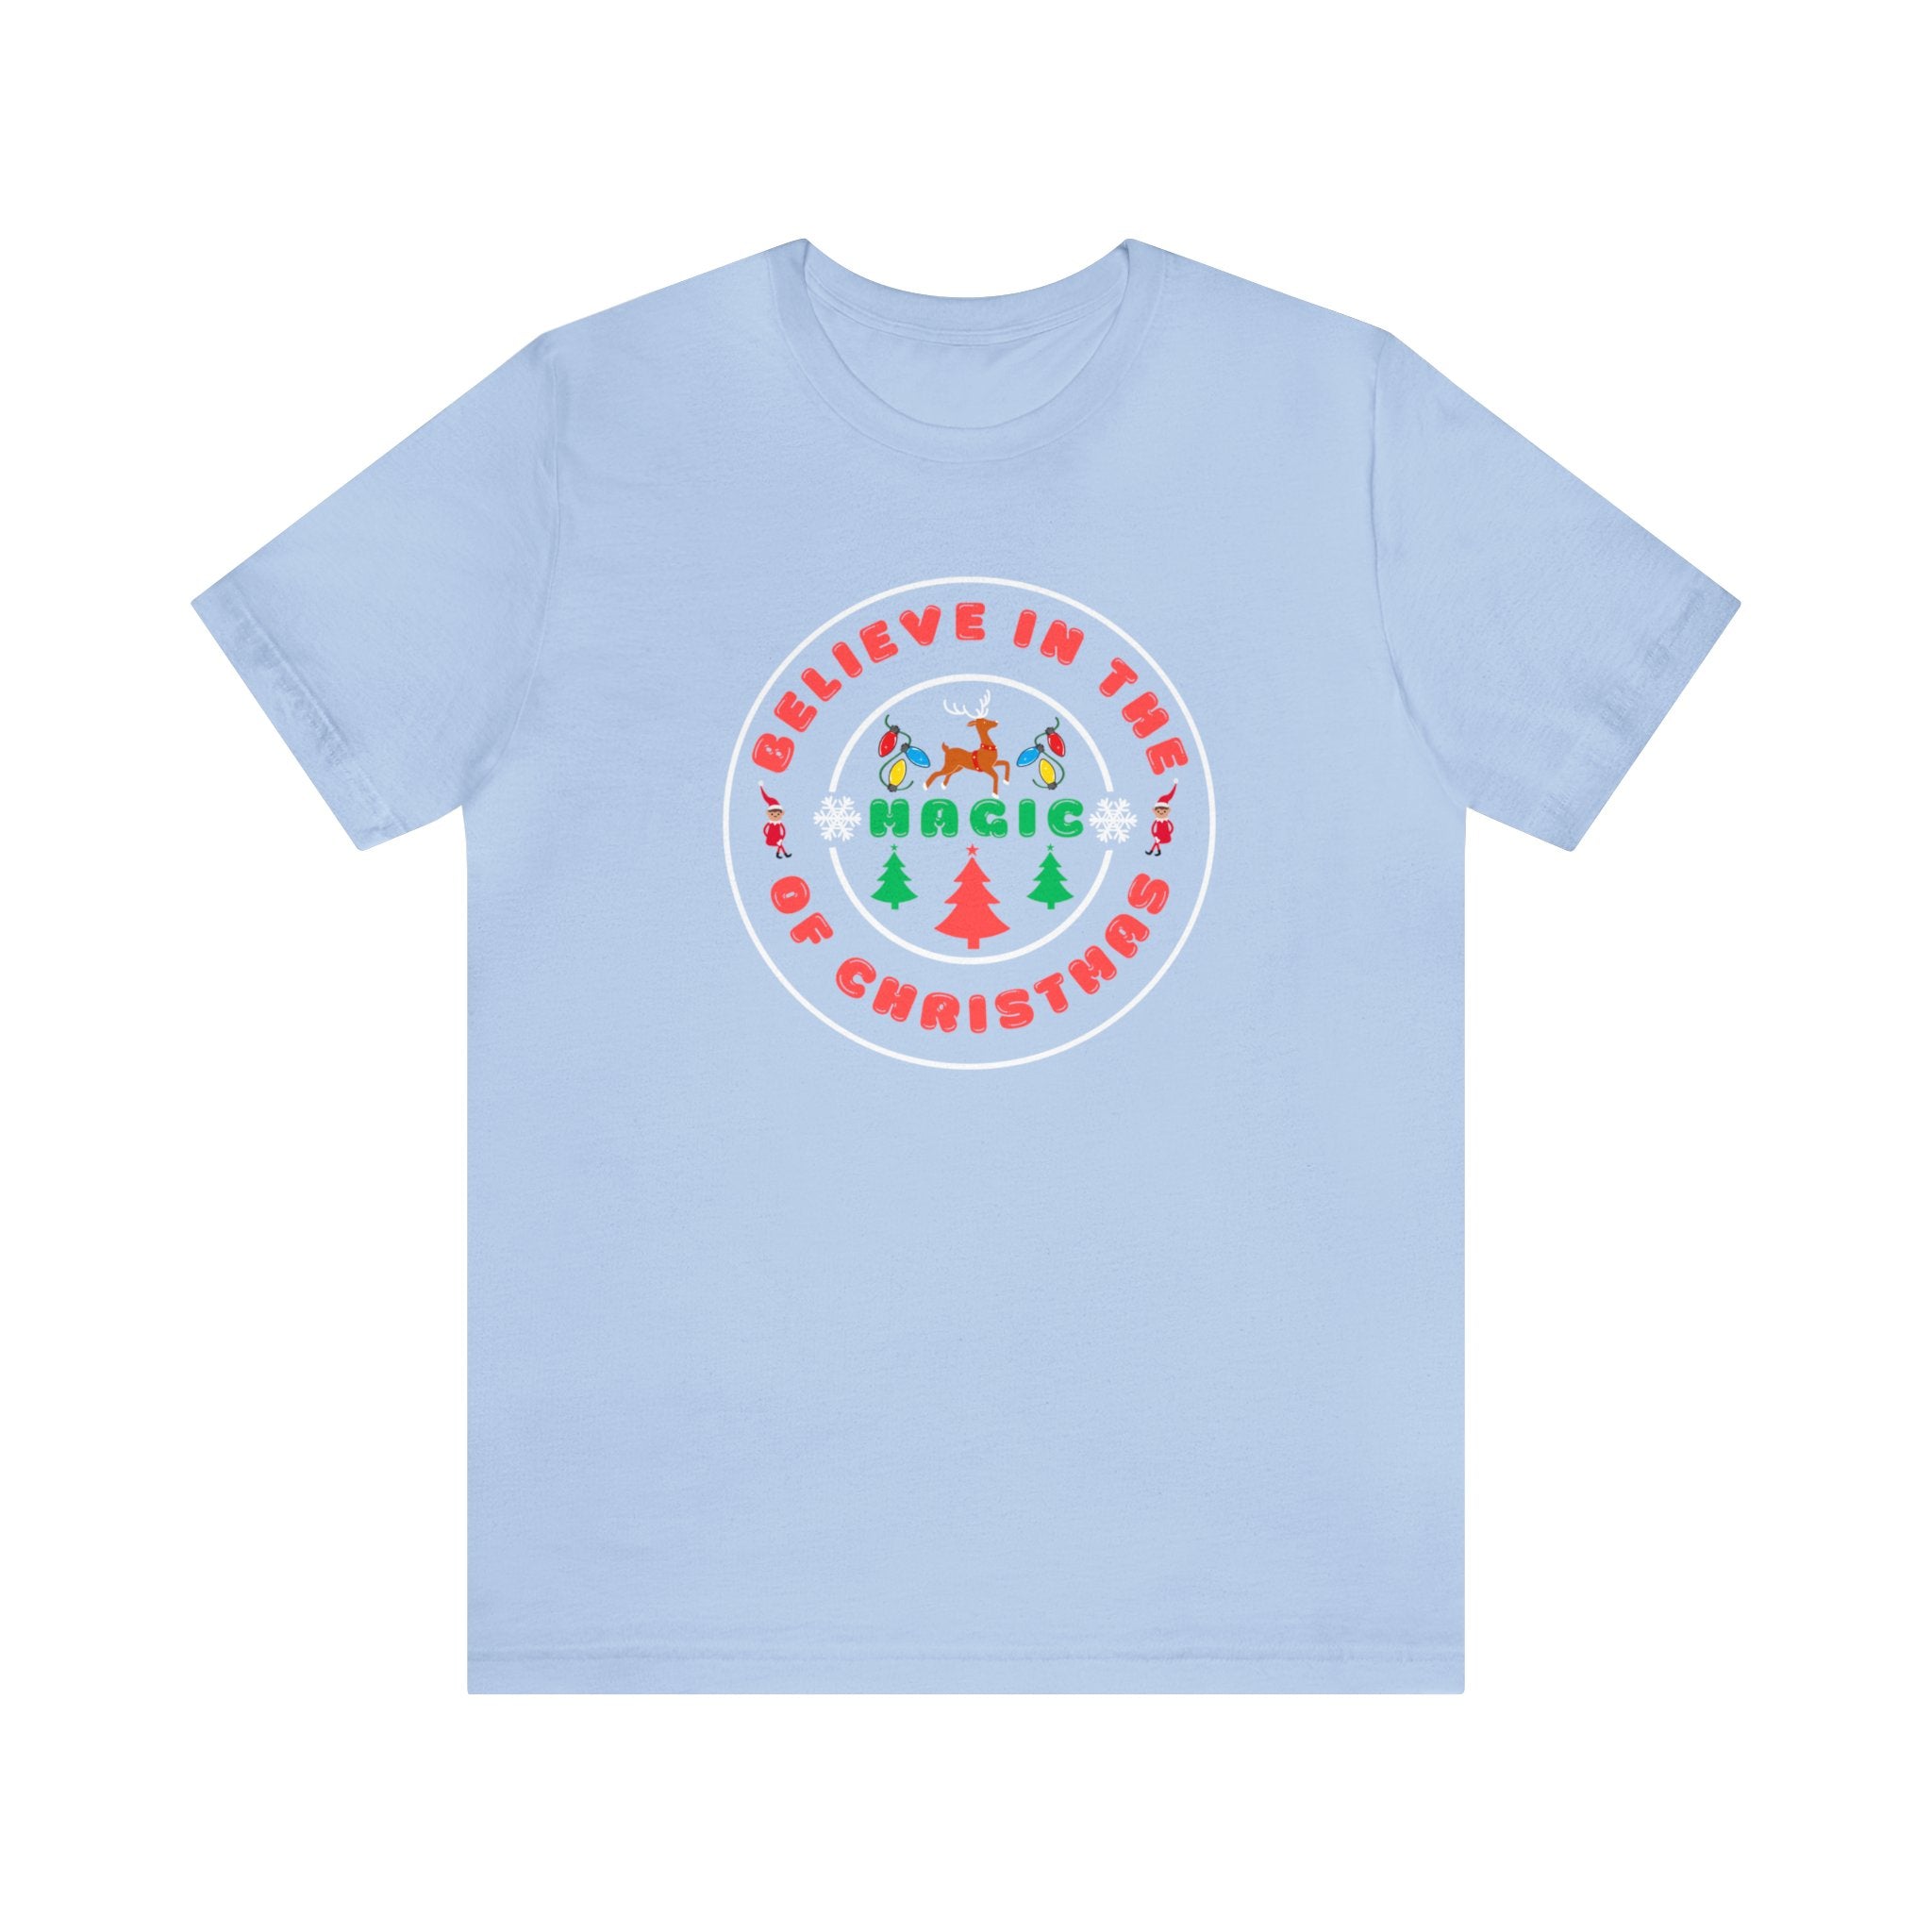 Believe In The Magic - Christmas Edition : Unisex 100% Comfy Cotton, T-Shirt by Bella+Canvas